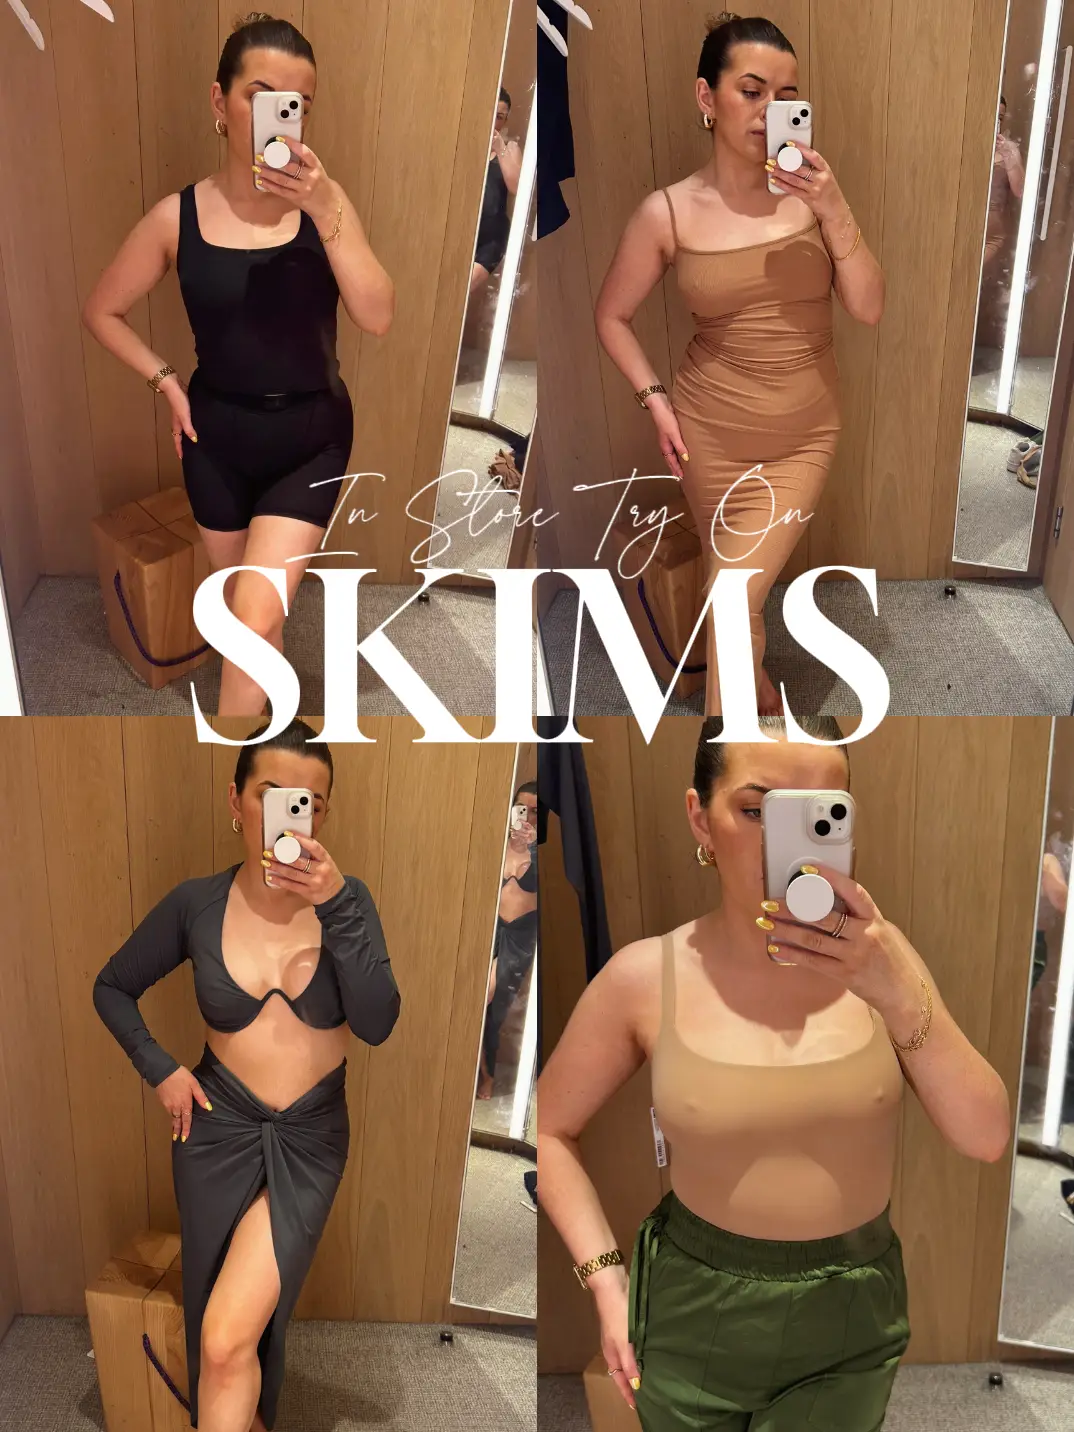 SKIMS FITS EVERYBODY COLLECTION REVIEW, Gallery posted by jenny